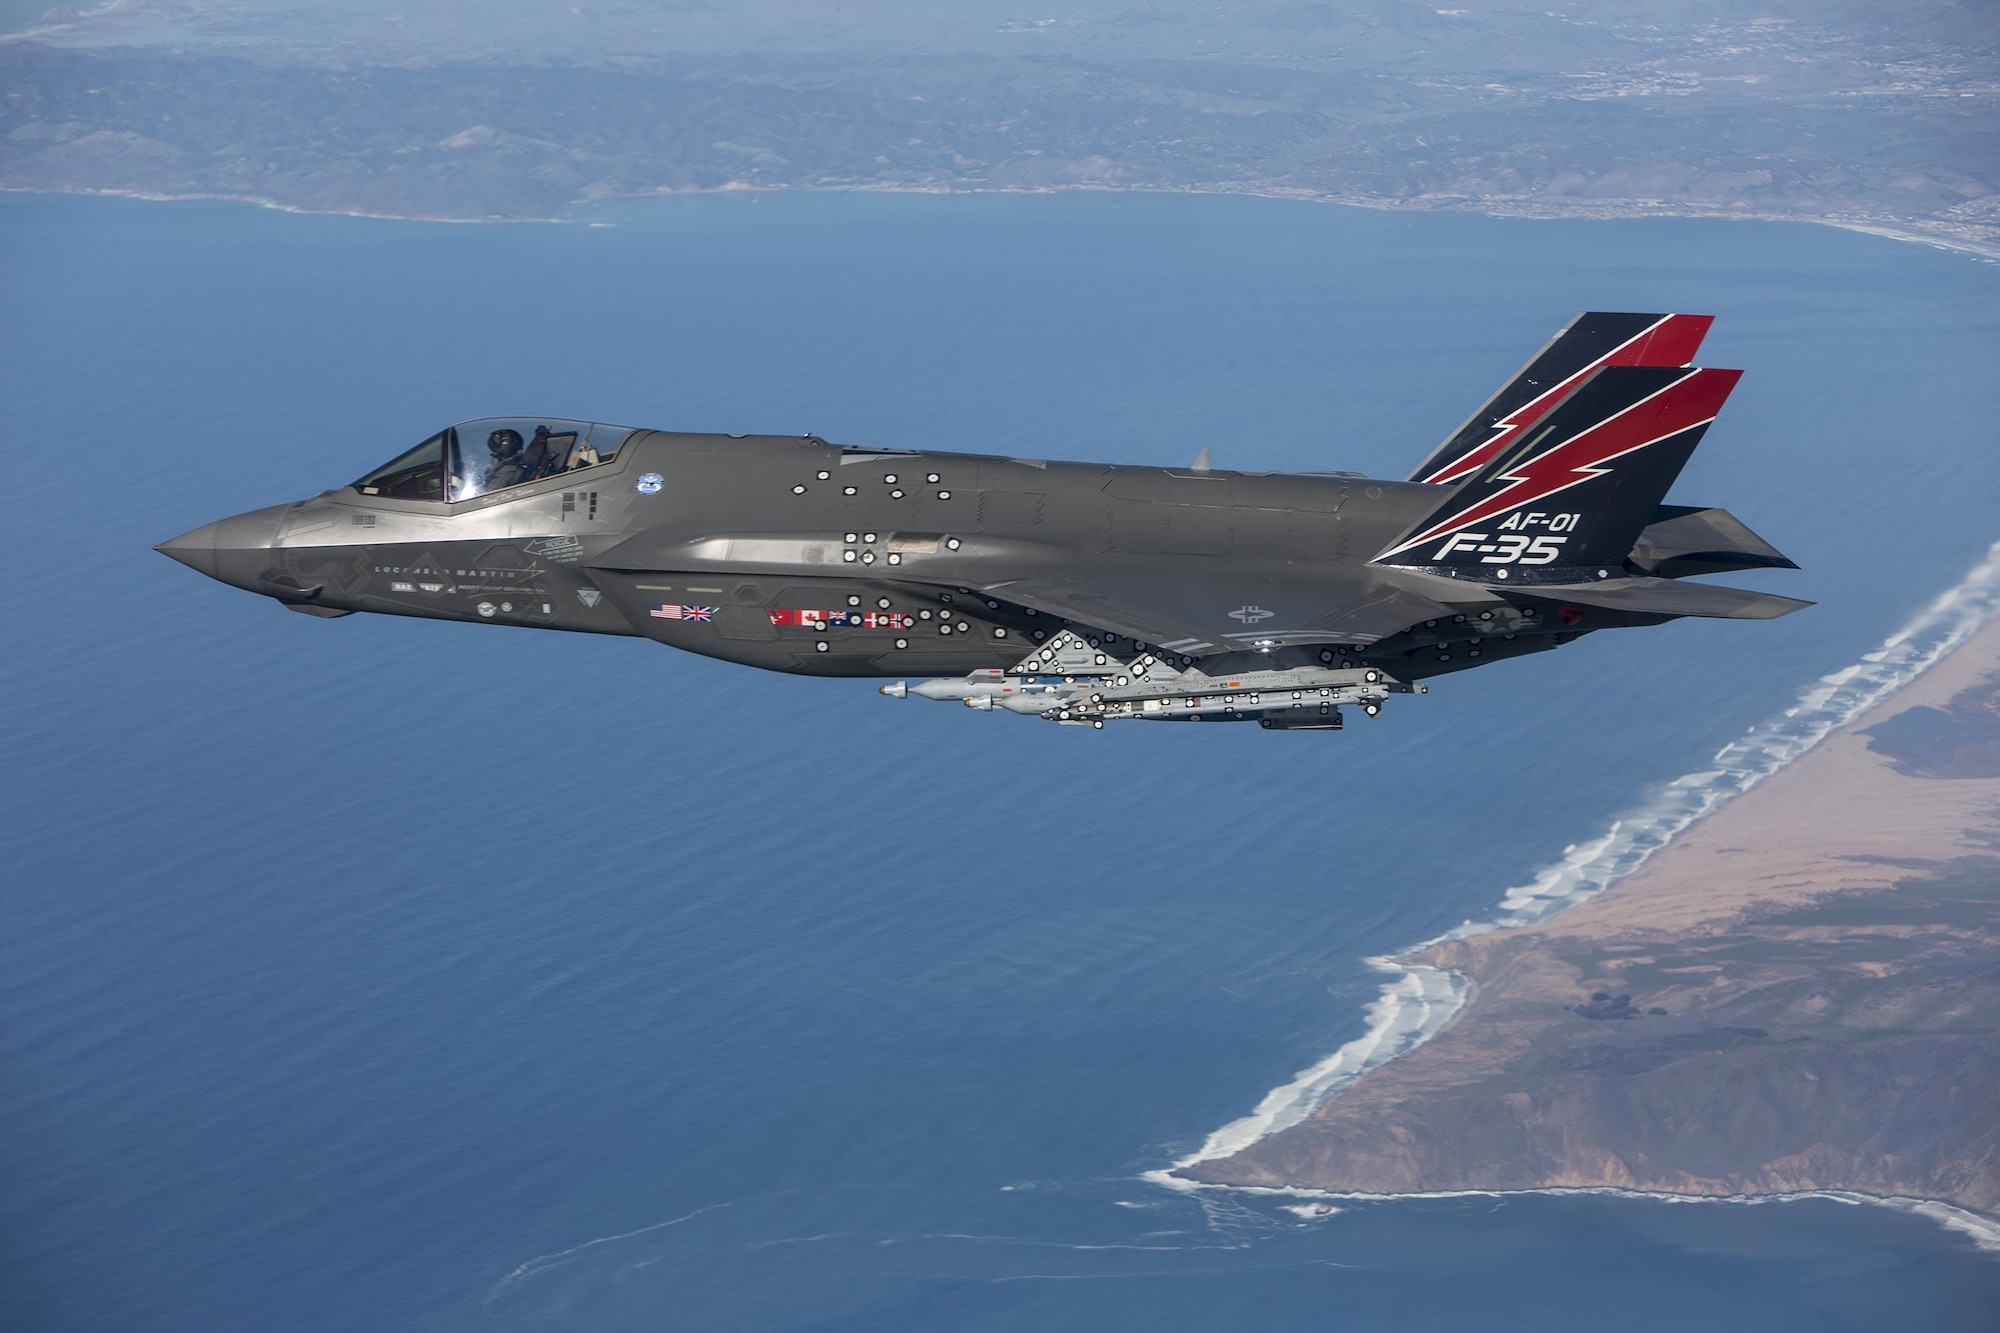 F-35 fires first AIM-9X missile > Air Force > Article Display